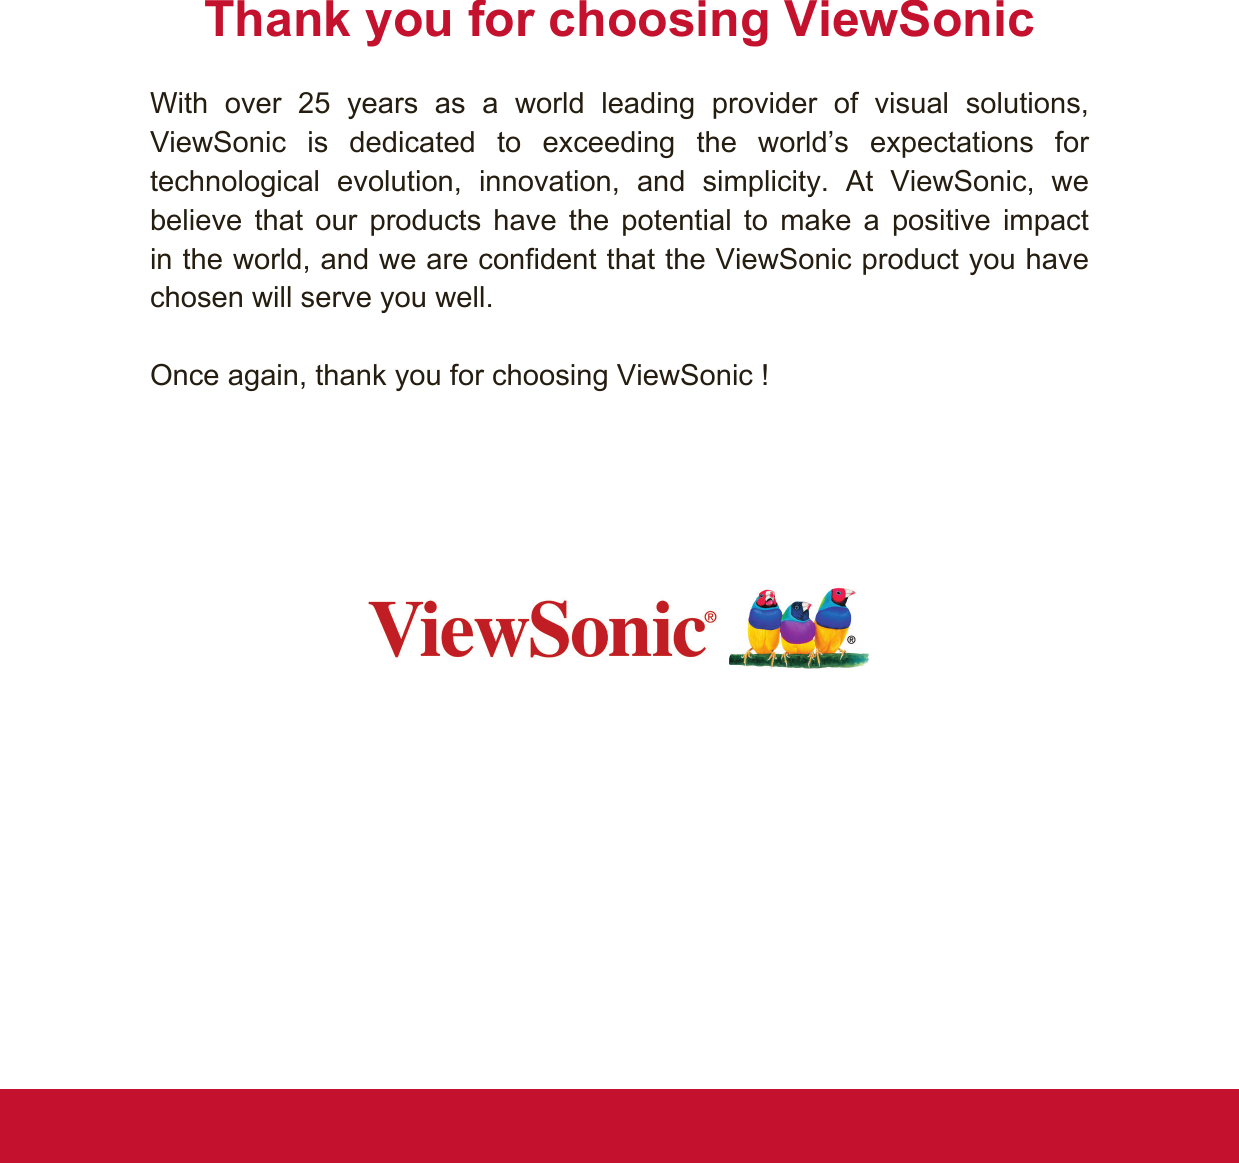 Thank you for choosing ViewSonicWith over 25 years as a world leading provider of visual solutions,  ViewSonic is dedicated to exceeding the world’s expectations for technological evolution, innovation, and simplicity. At ViewSonic, we believe that our products have the potential to make a positive impact in the world, and we are confident that the ViewSonic product you have chosen will serve you well. Once again, thank you for choosing ViewSonic !